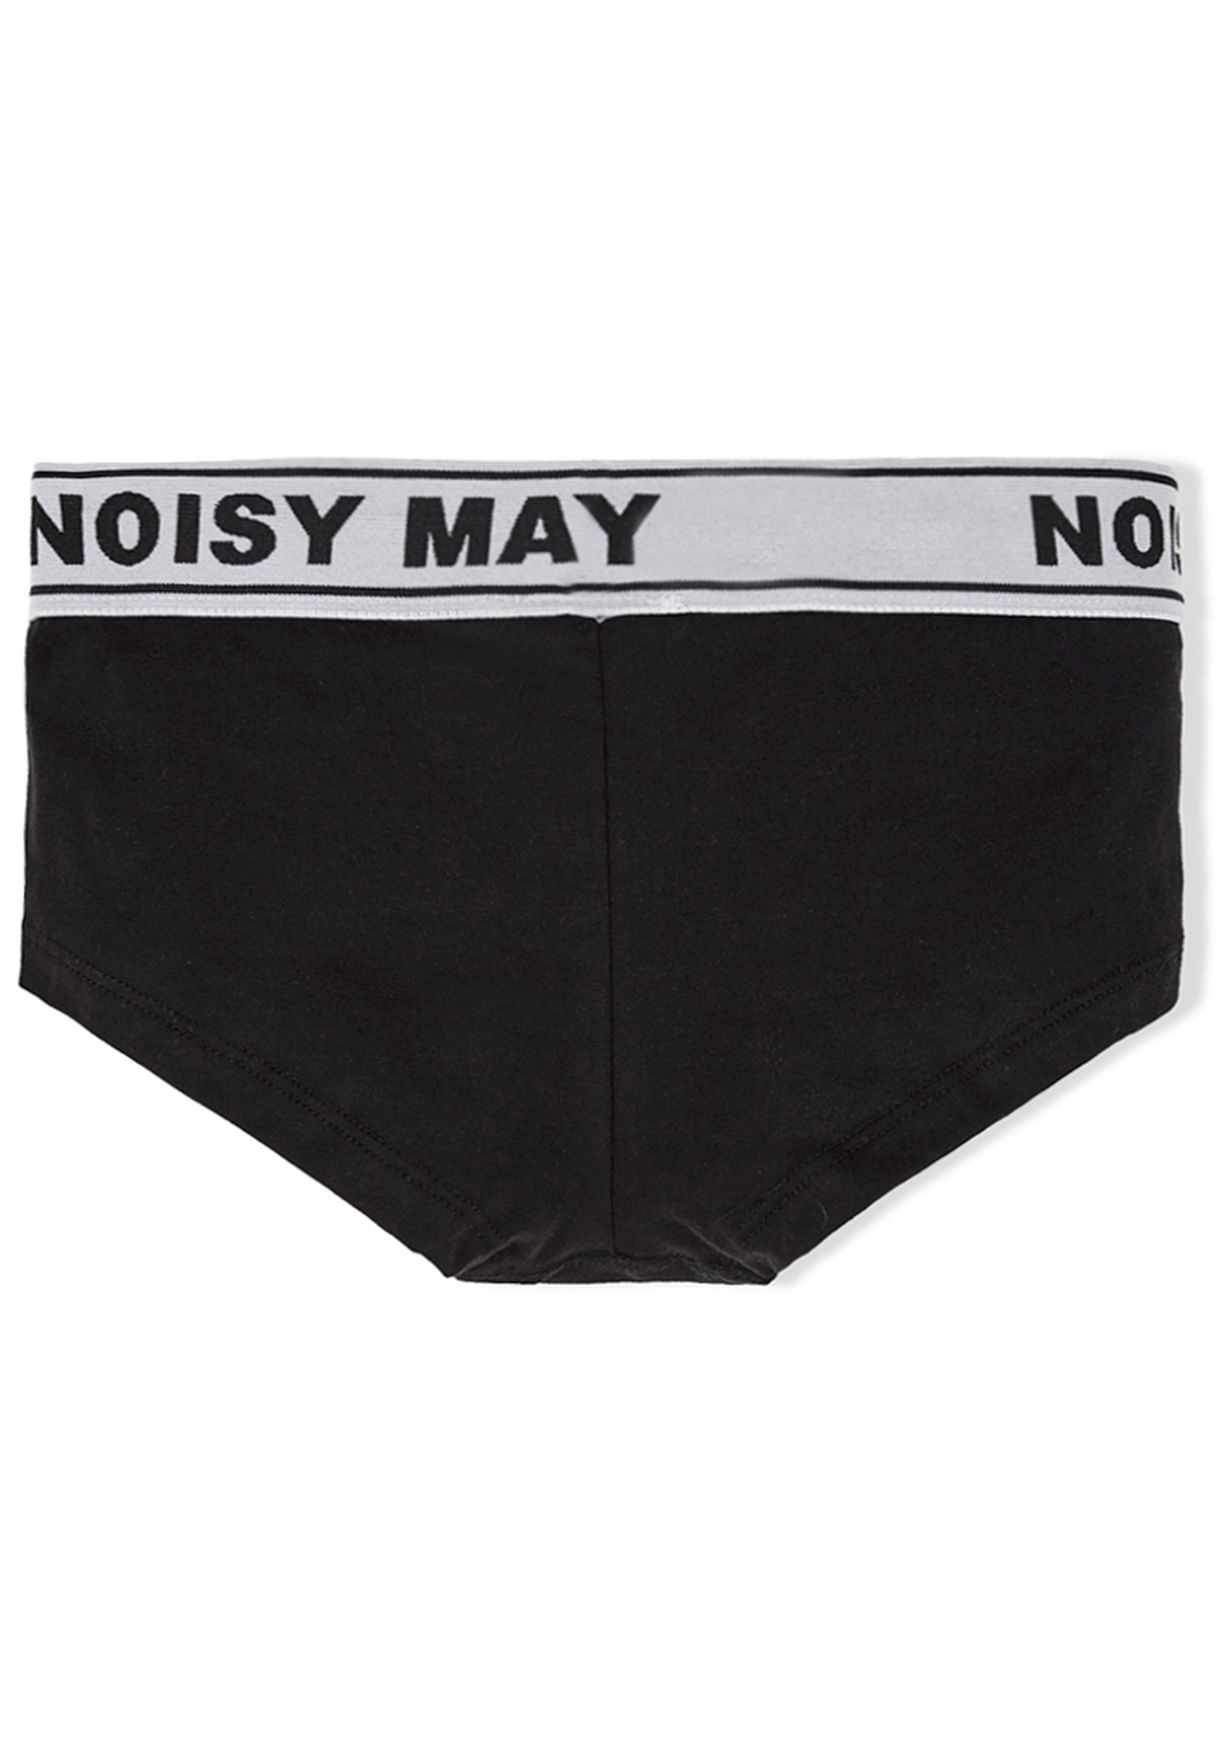 are boxers noisy